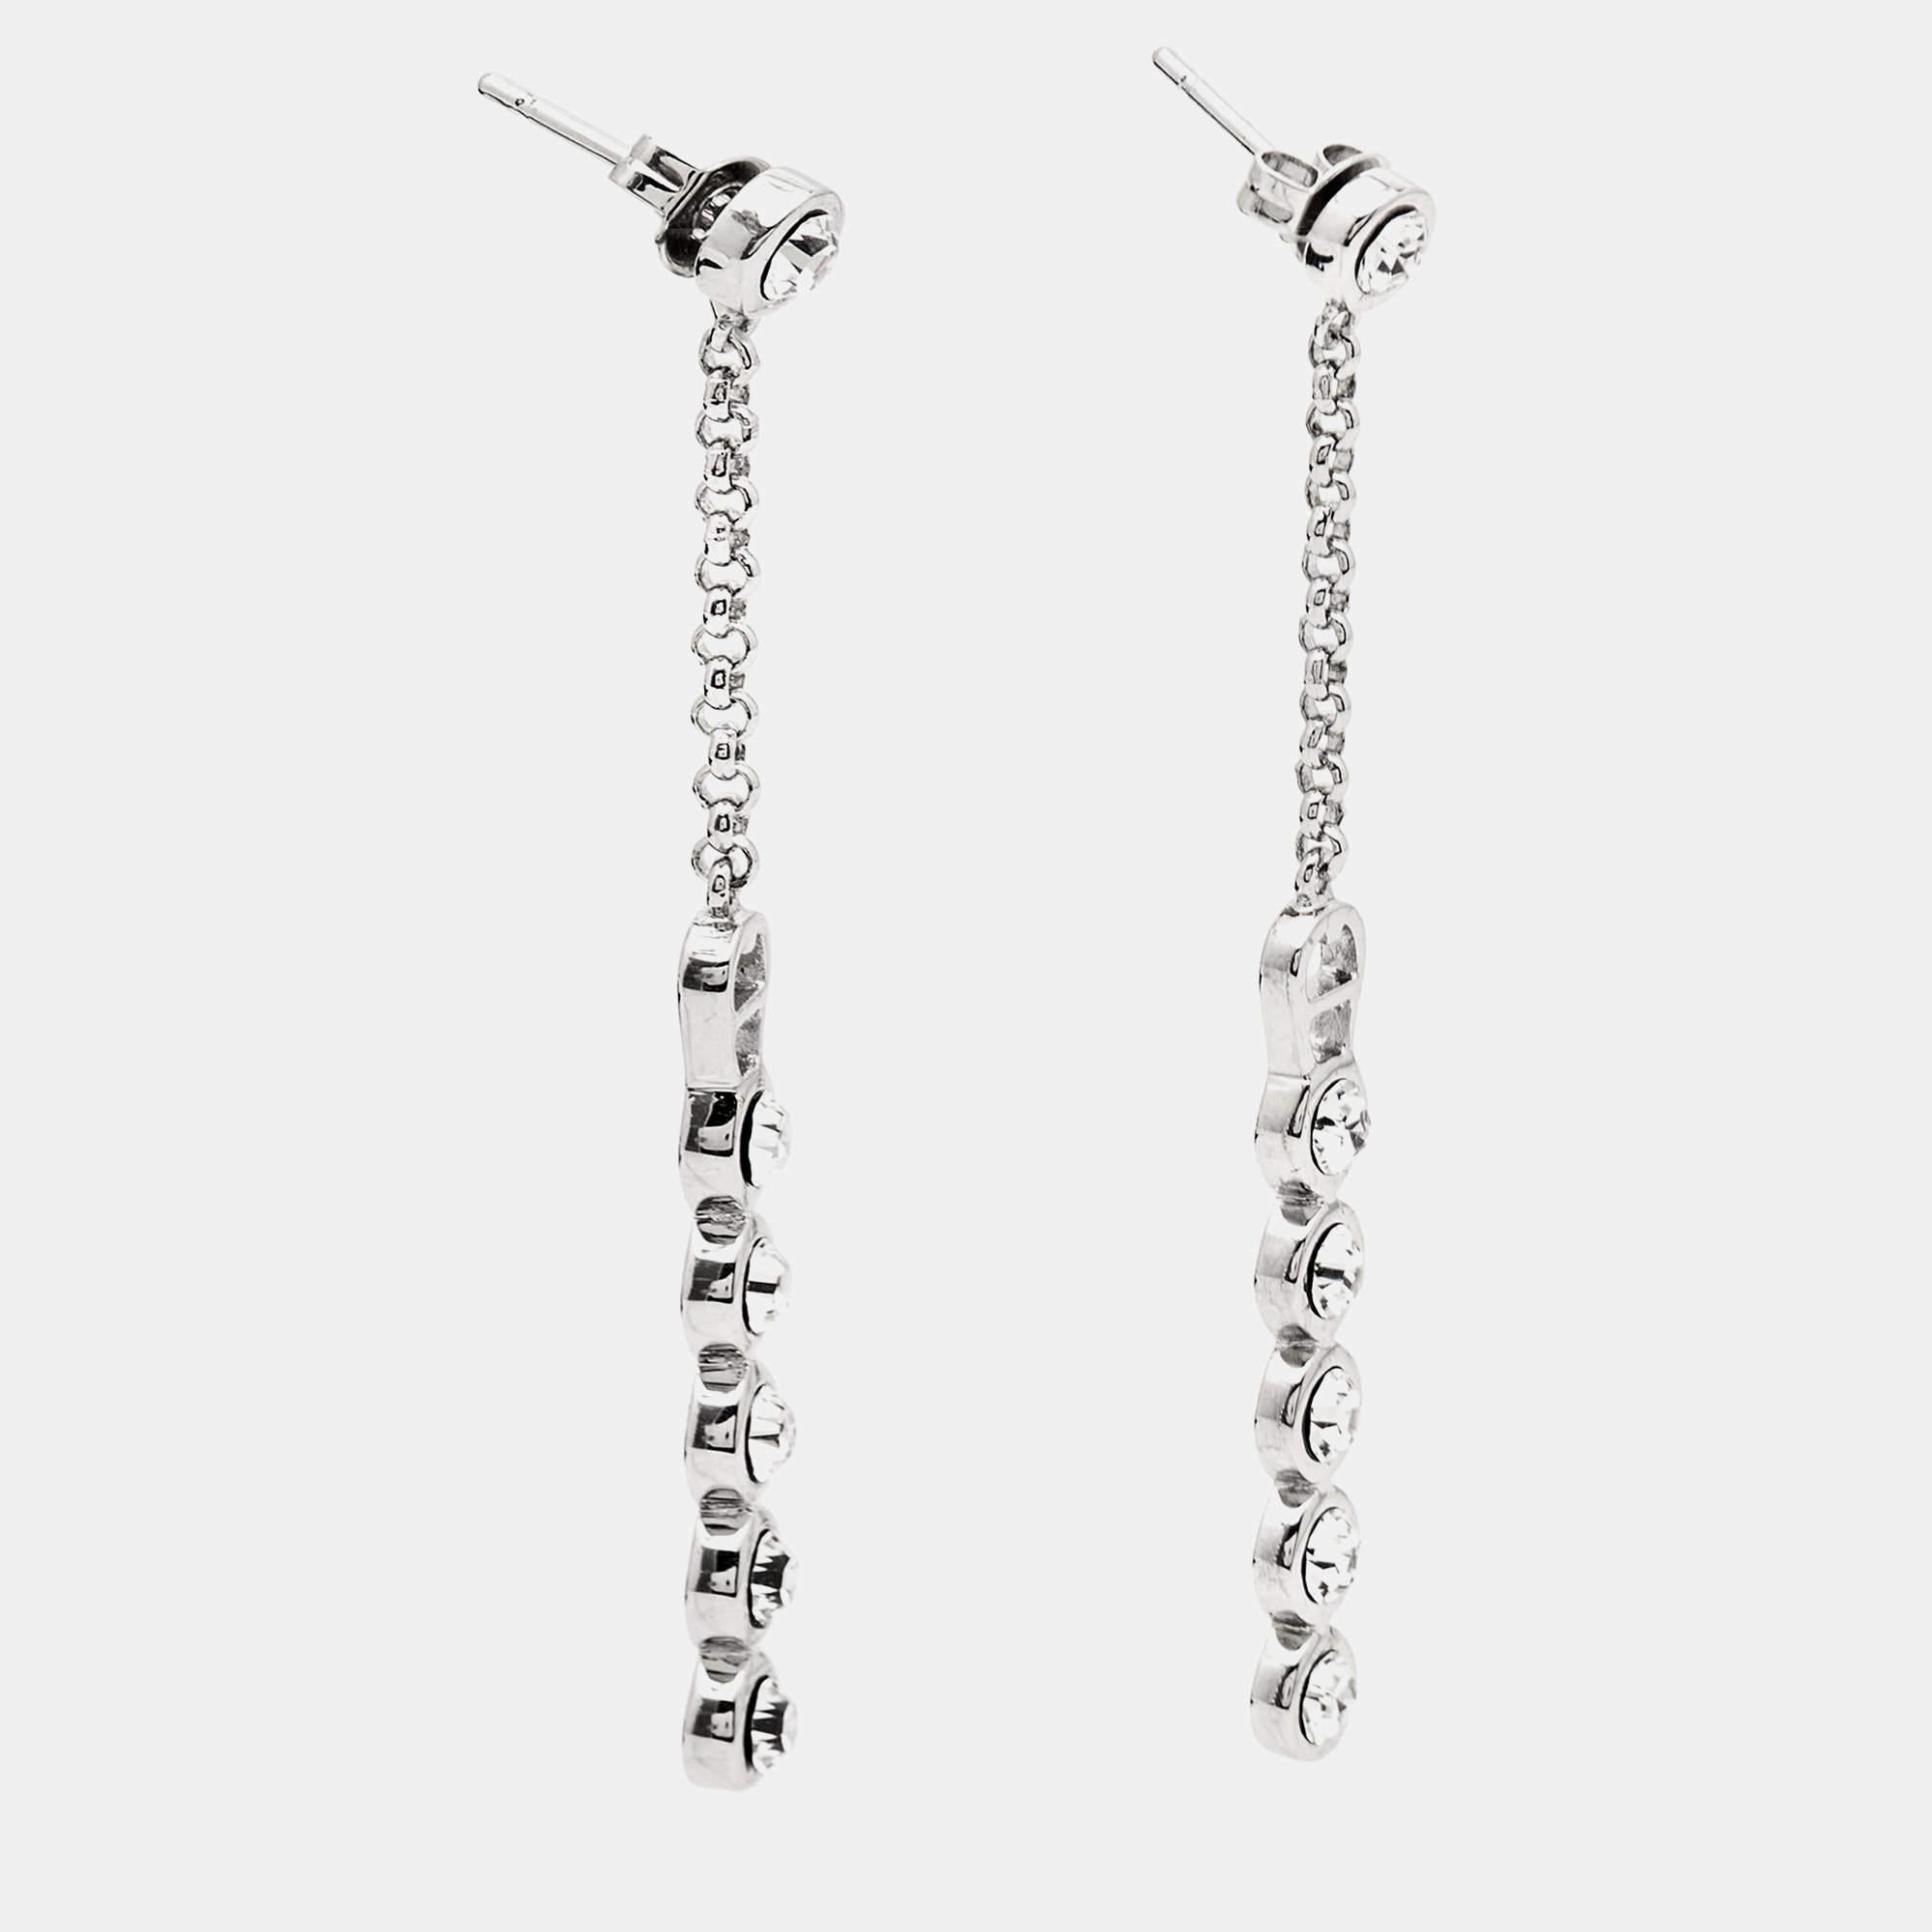 Contemporary Aigner Crystals Silver Tone Earrings For Sale